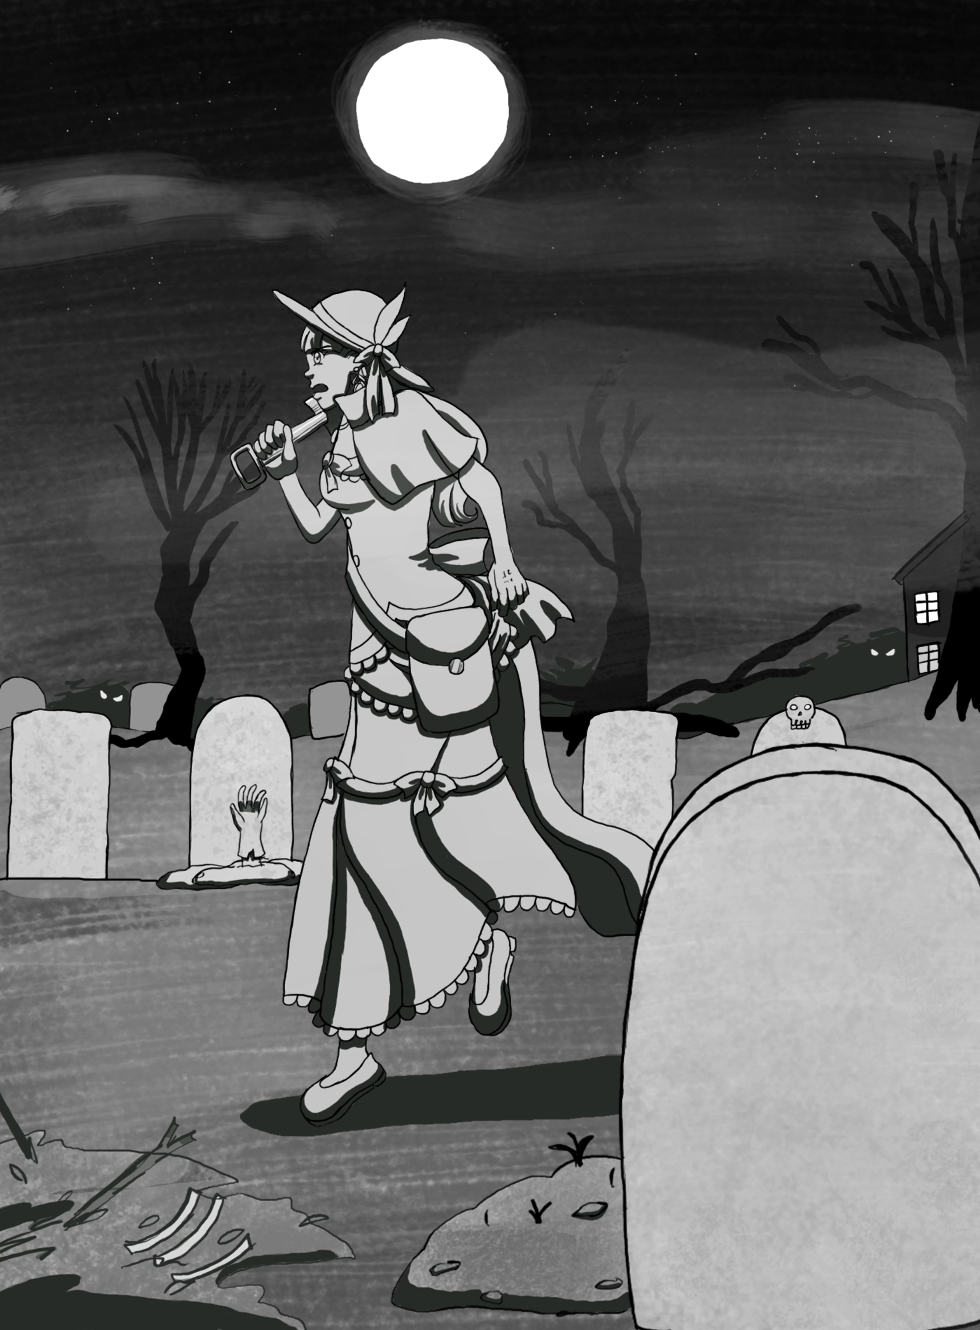 Image description: A grayscale drawing of Chelsea from Magical Renegades wearing a fancy dress. She is walking with an angry expression, and is holding a small digging tool in one of her hands while she walks through a graveyard.